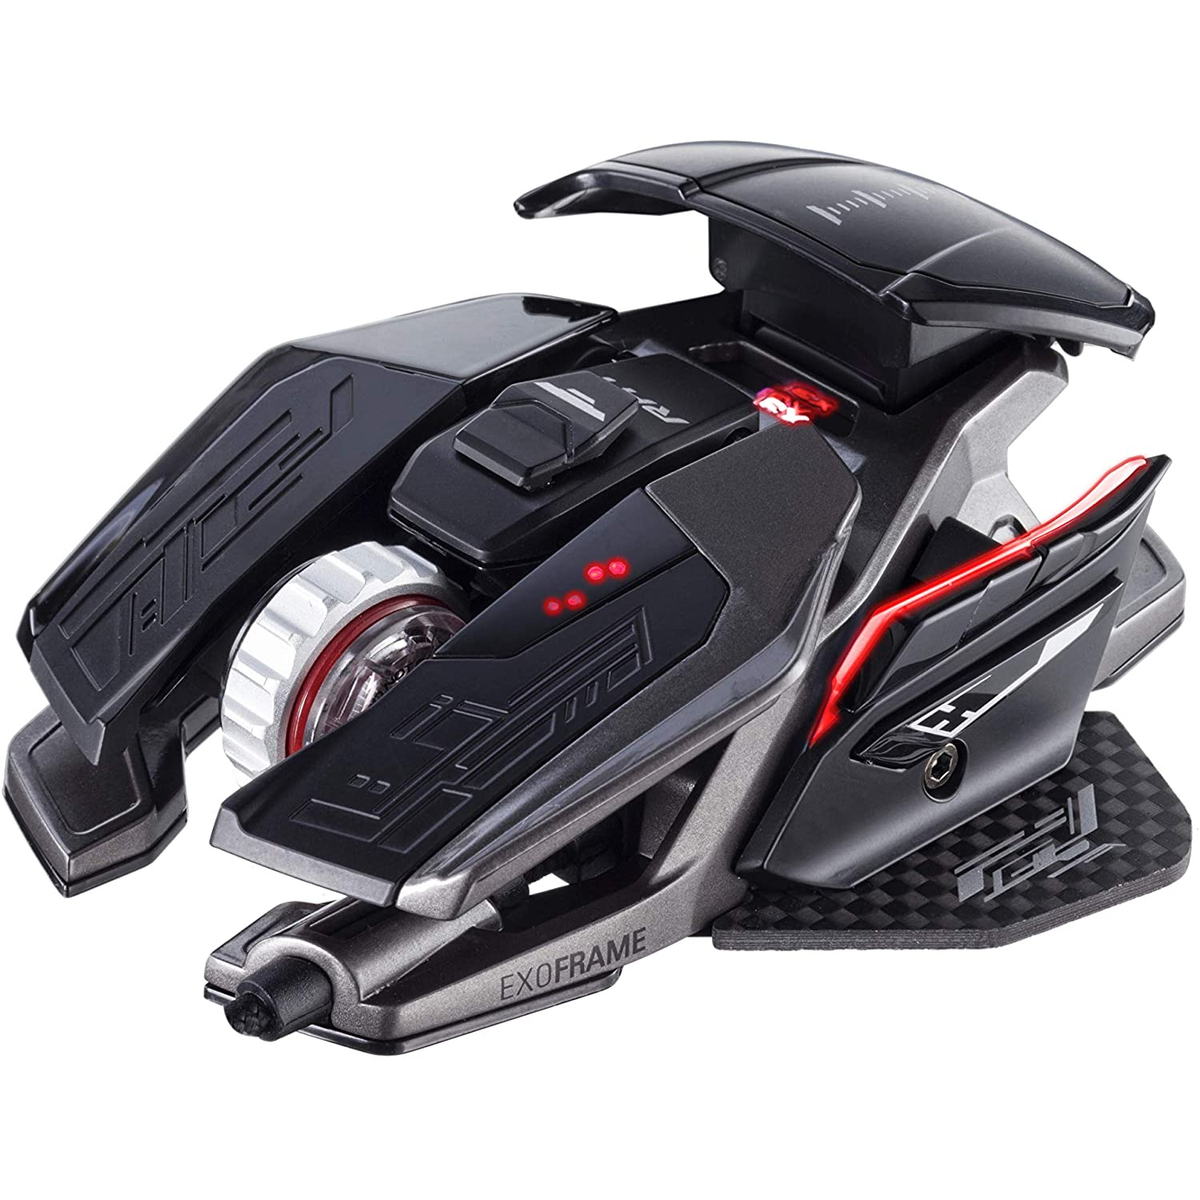 MAD CATZ MR05DCINBL001-0 X3 PERFORMANCE black MOUSE Maus, GAM. HIGH Gaming BL